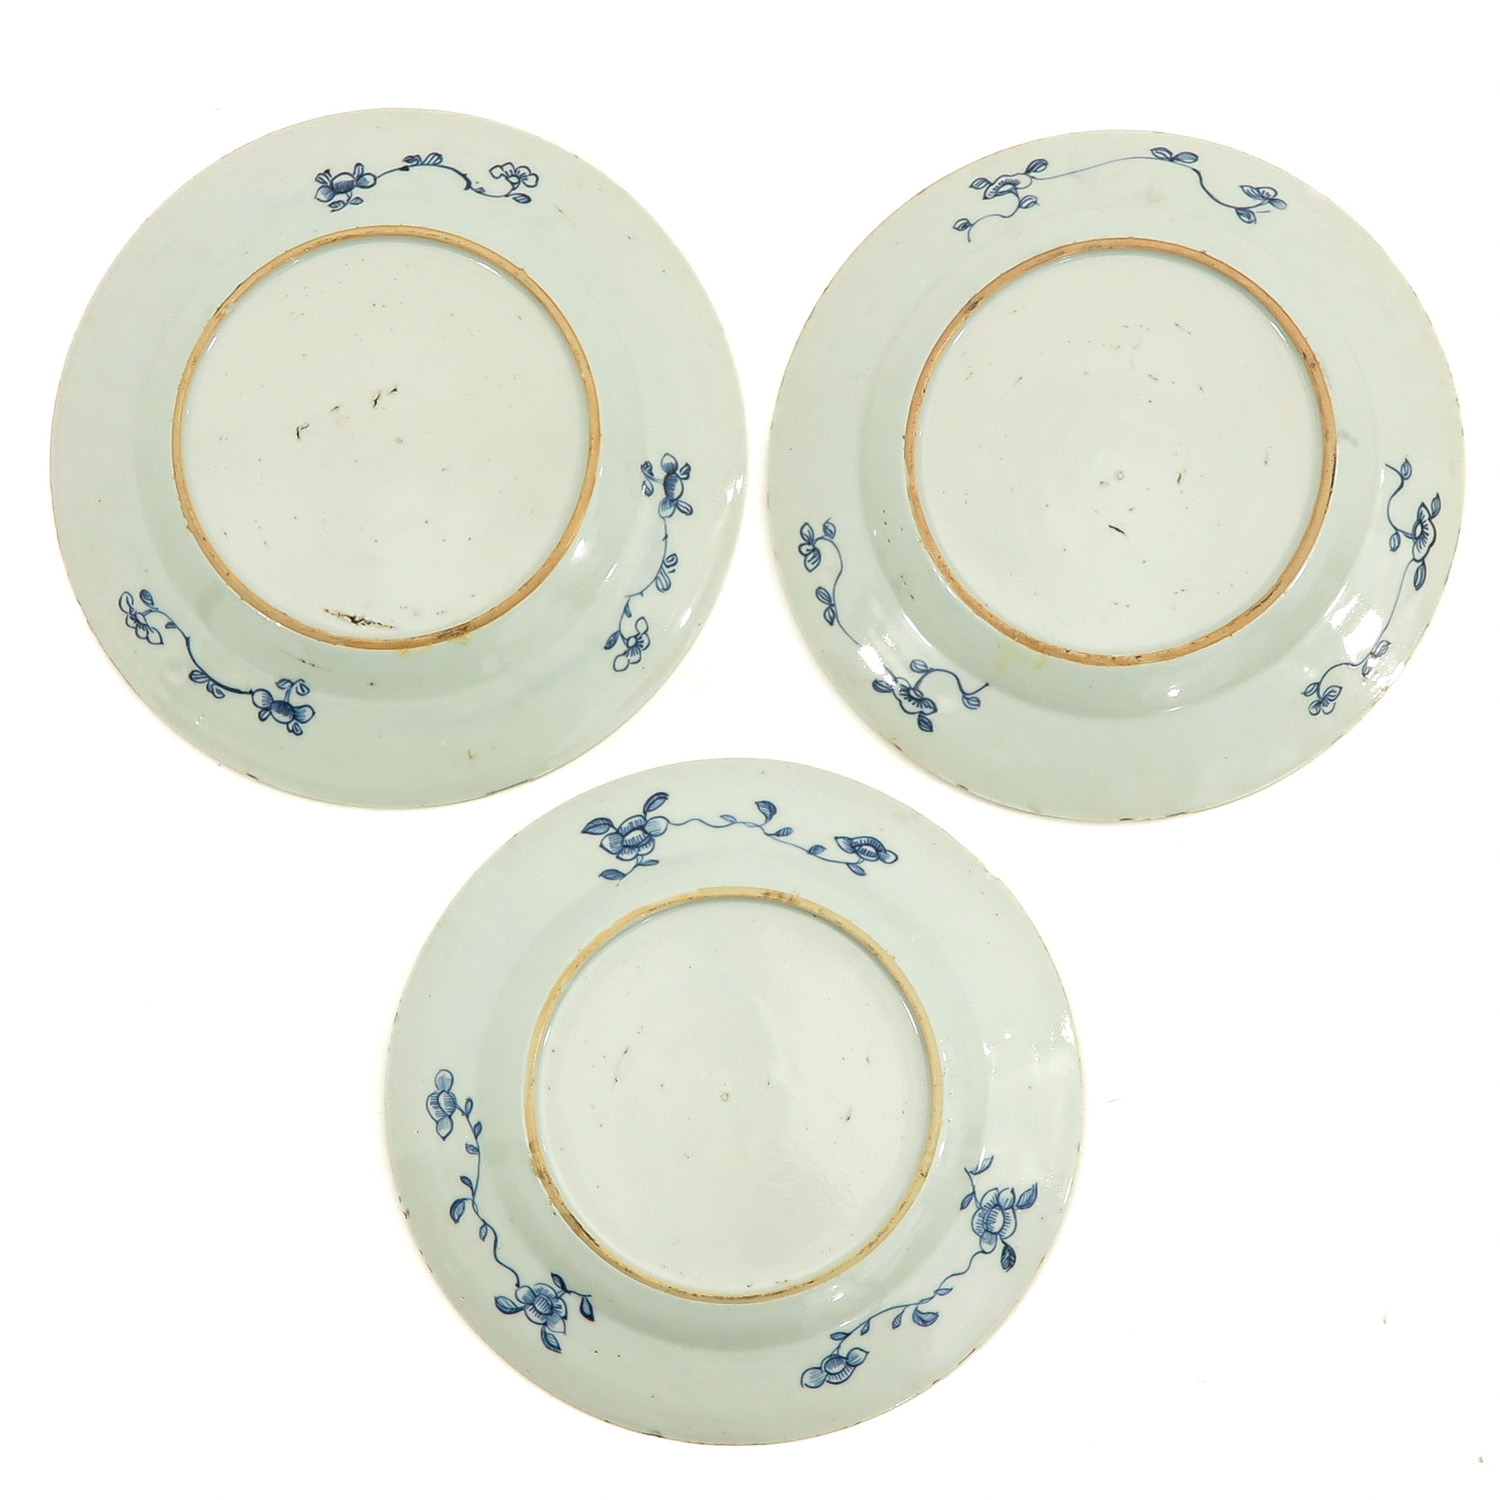 A Series of 3 Blue and White Plates - Image 2 of 10